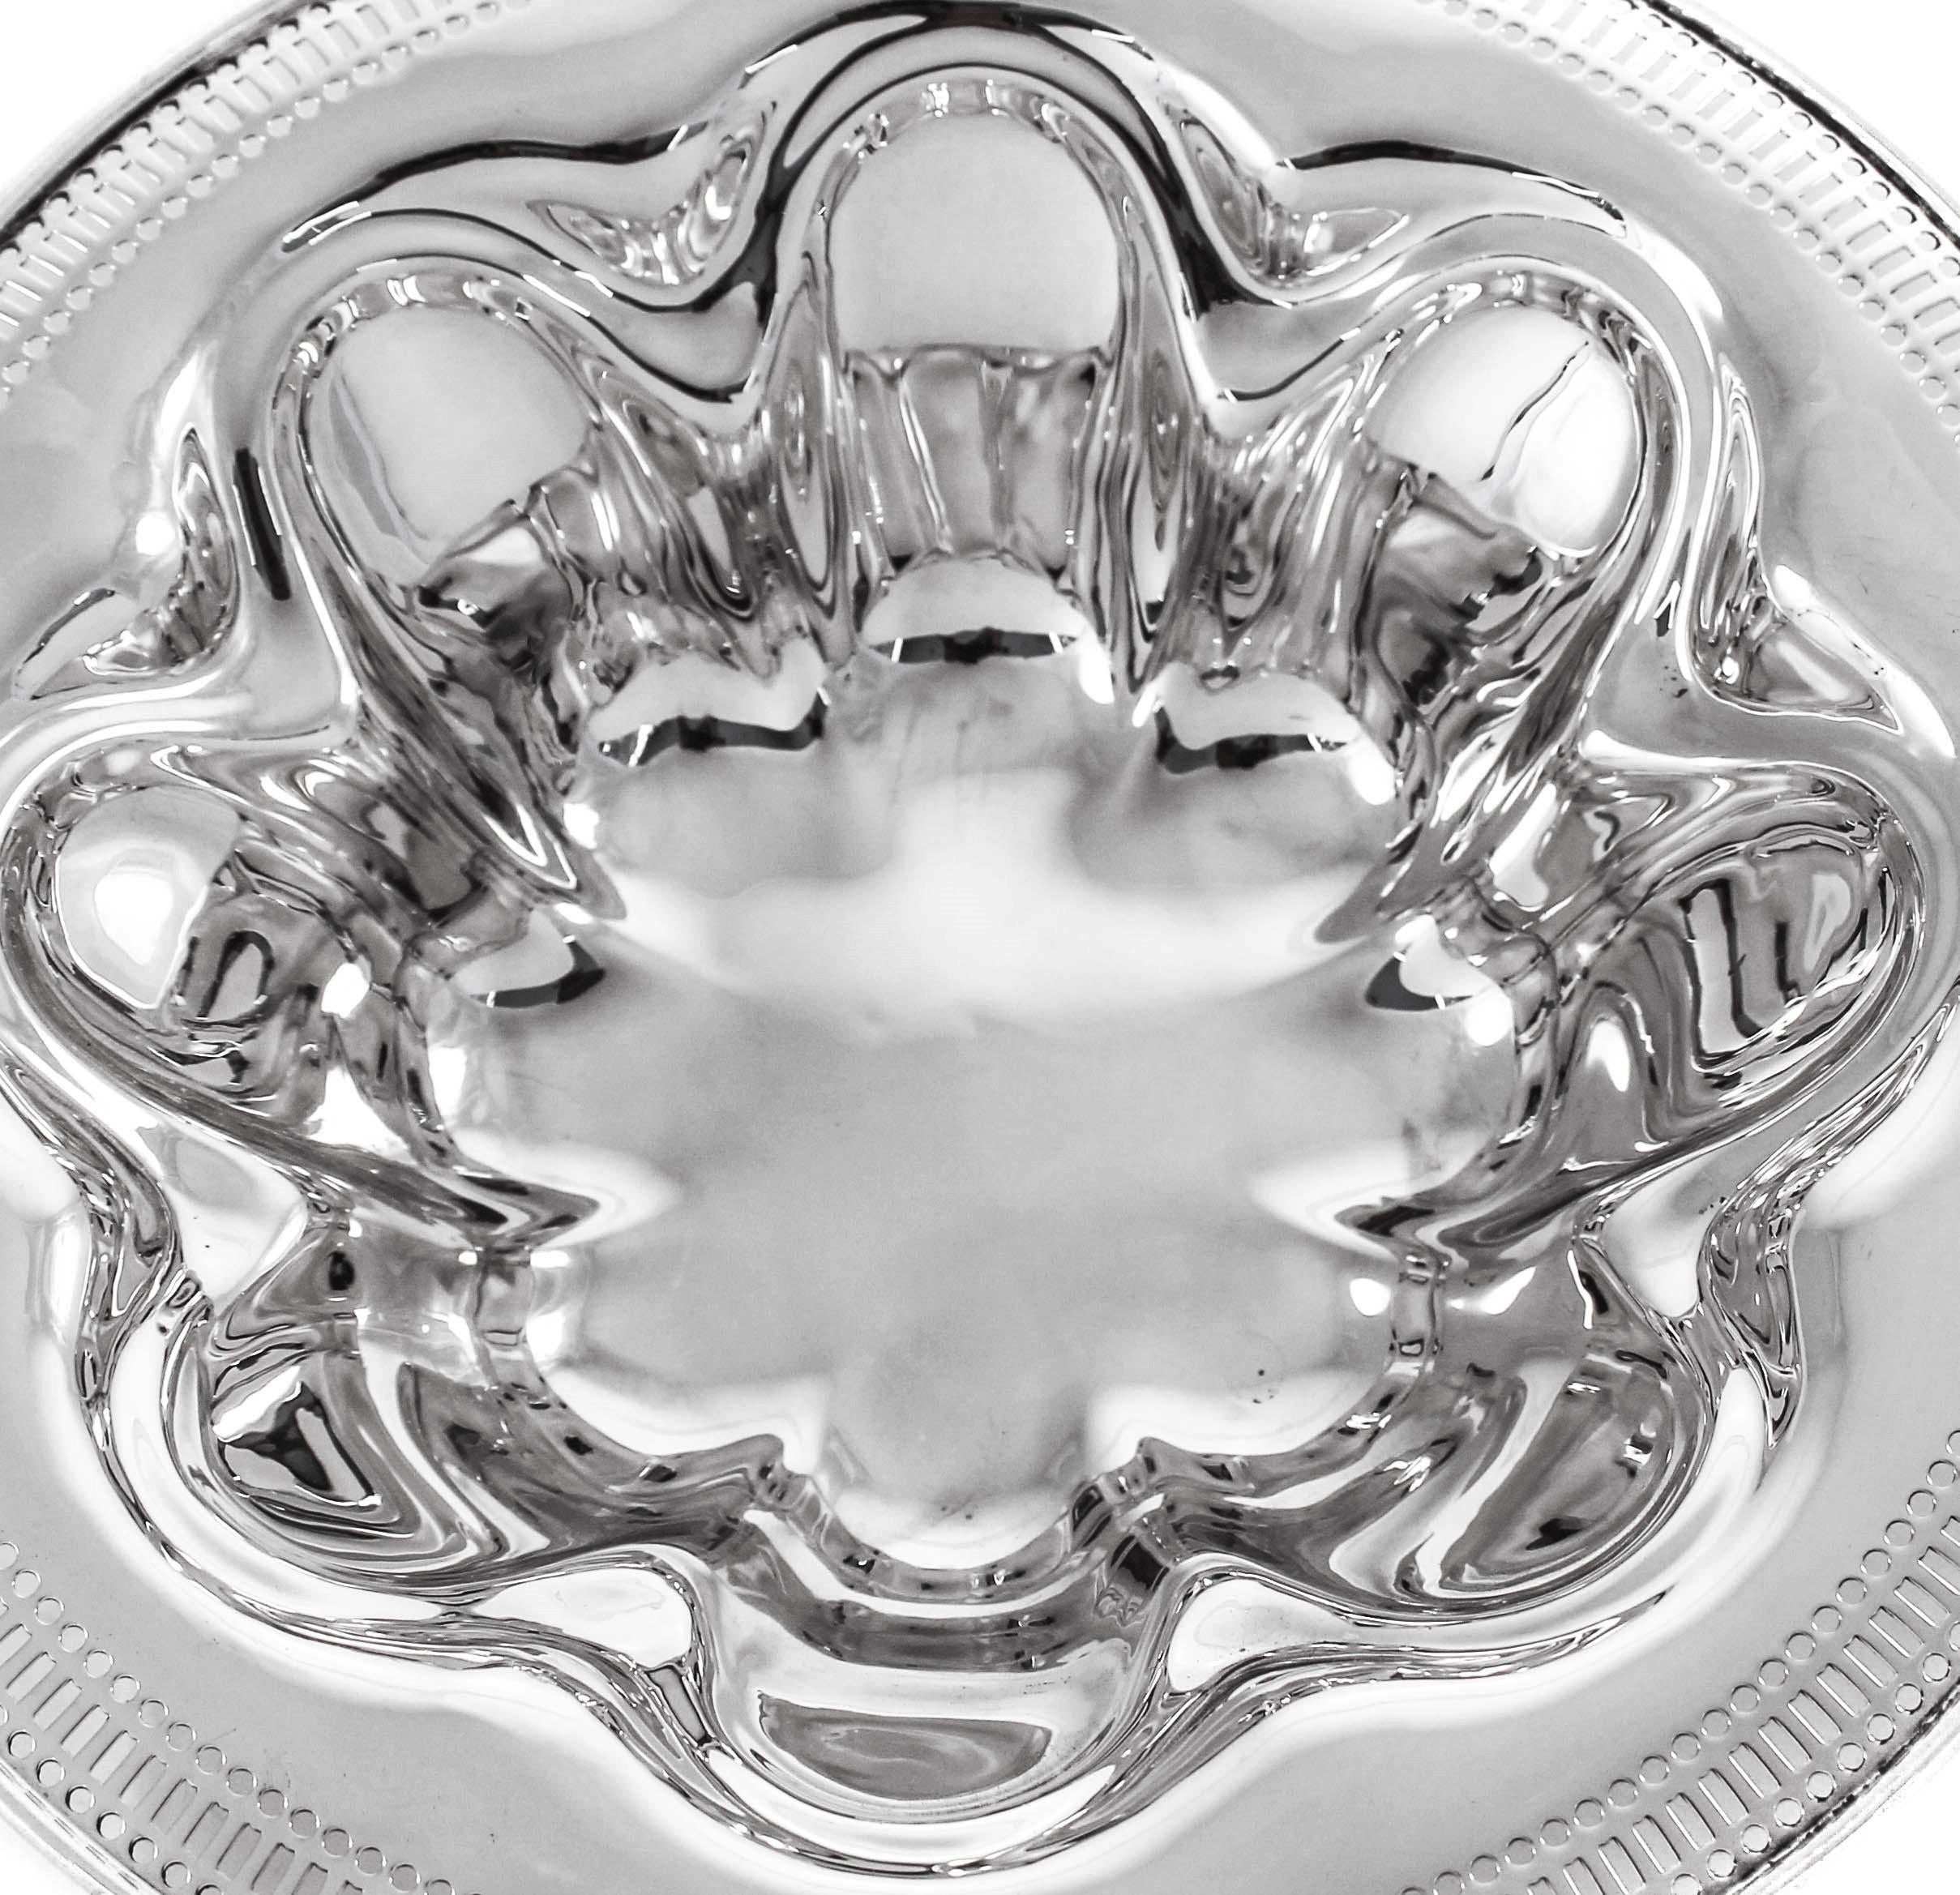 This bowl has an Art Deco style to it; the symmetrical cut-outs along the edge. On the inside eight indented shapes give the bowl another dimension of the Art Deco style.